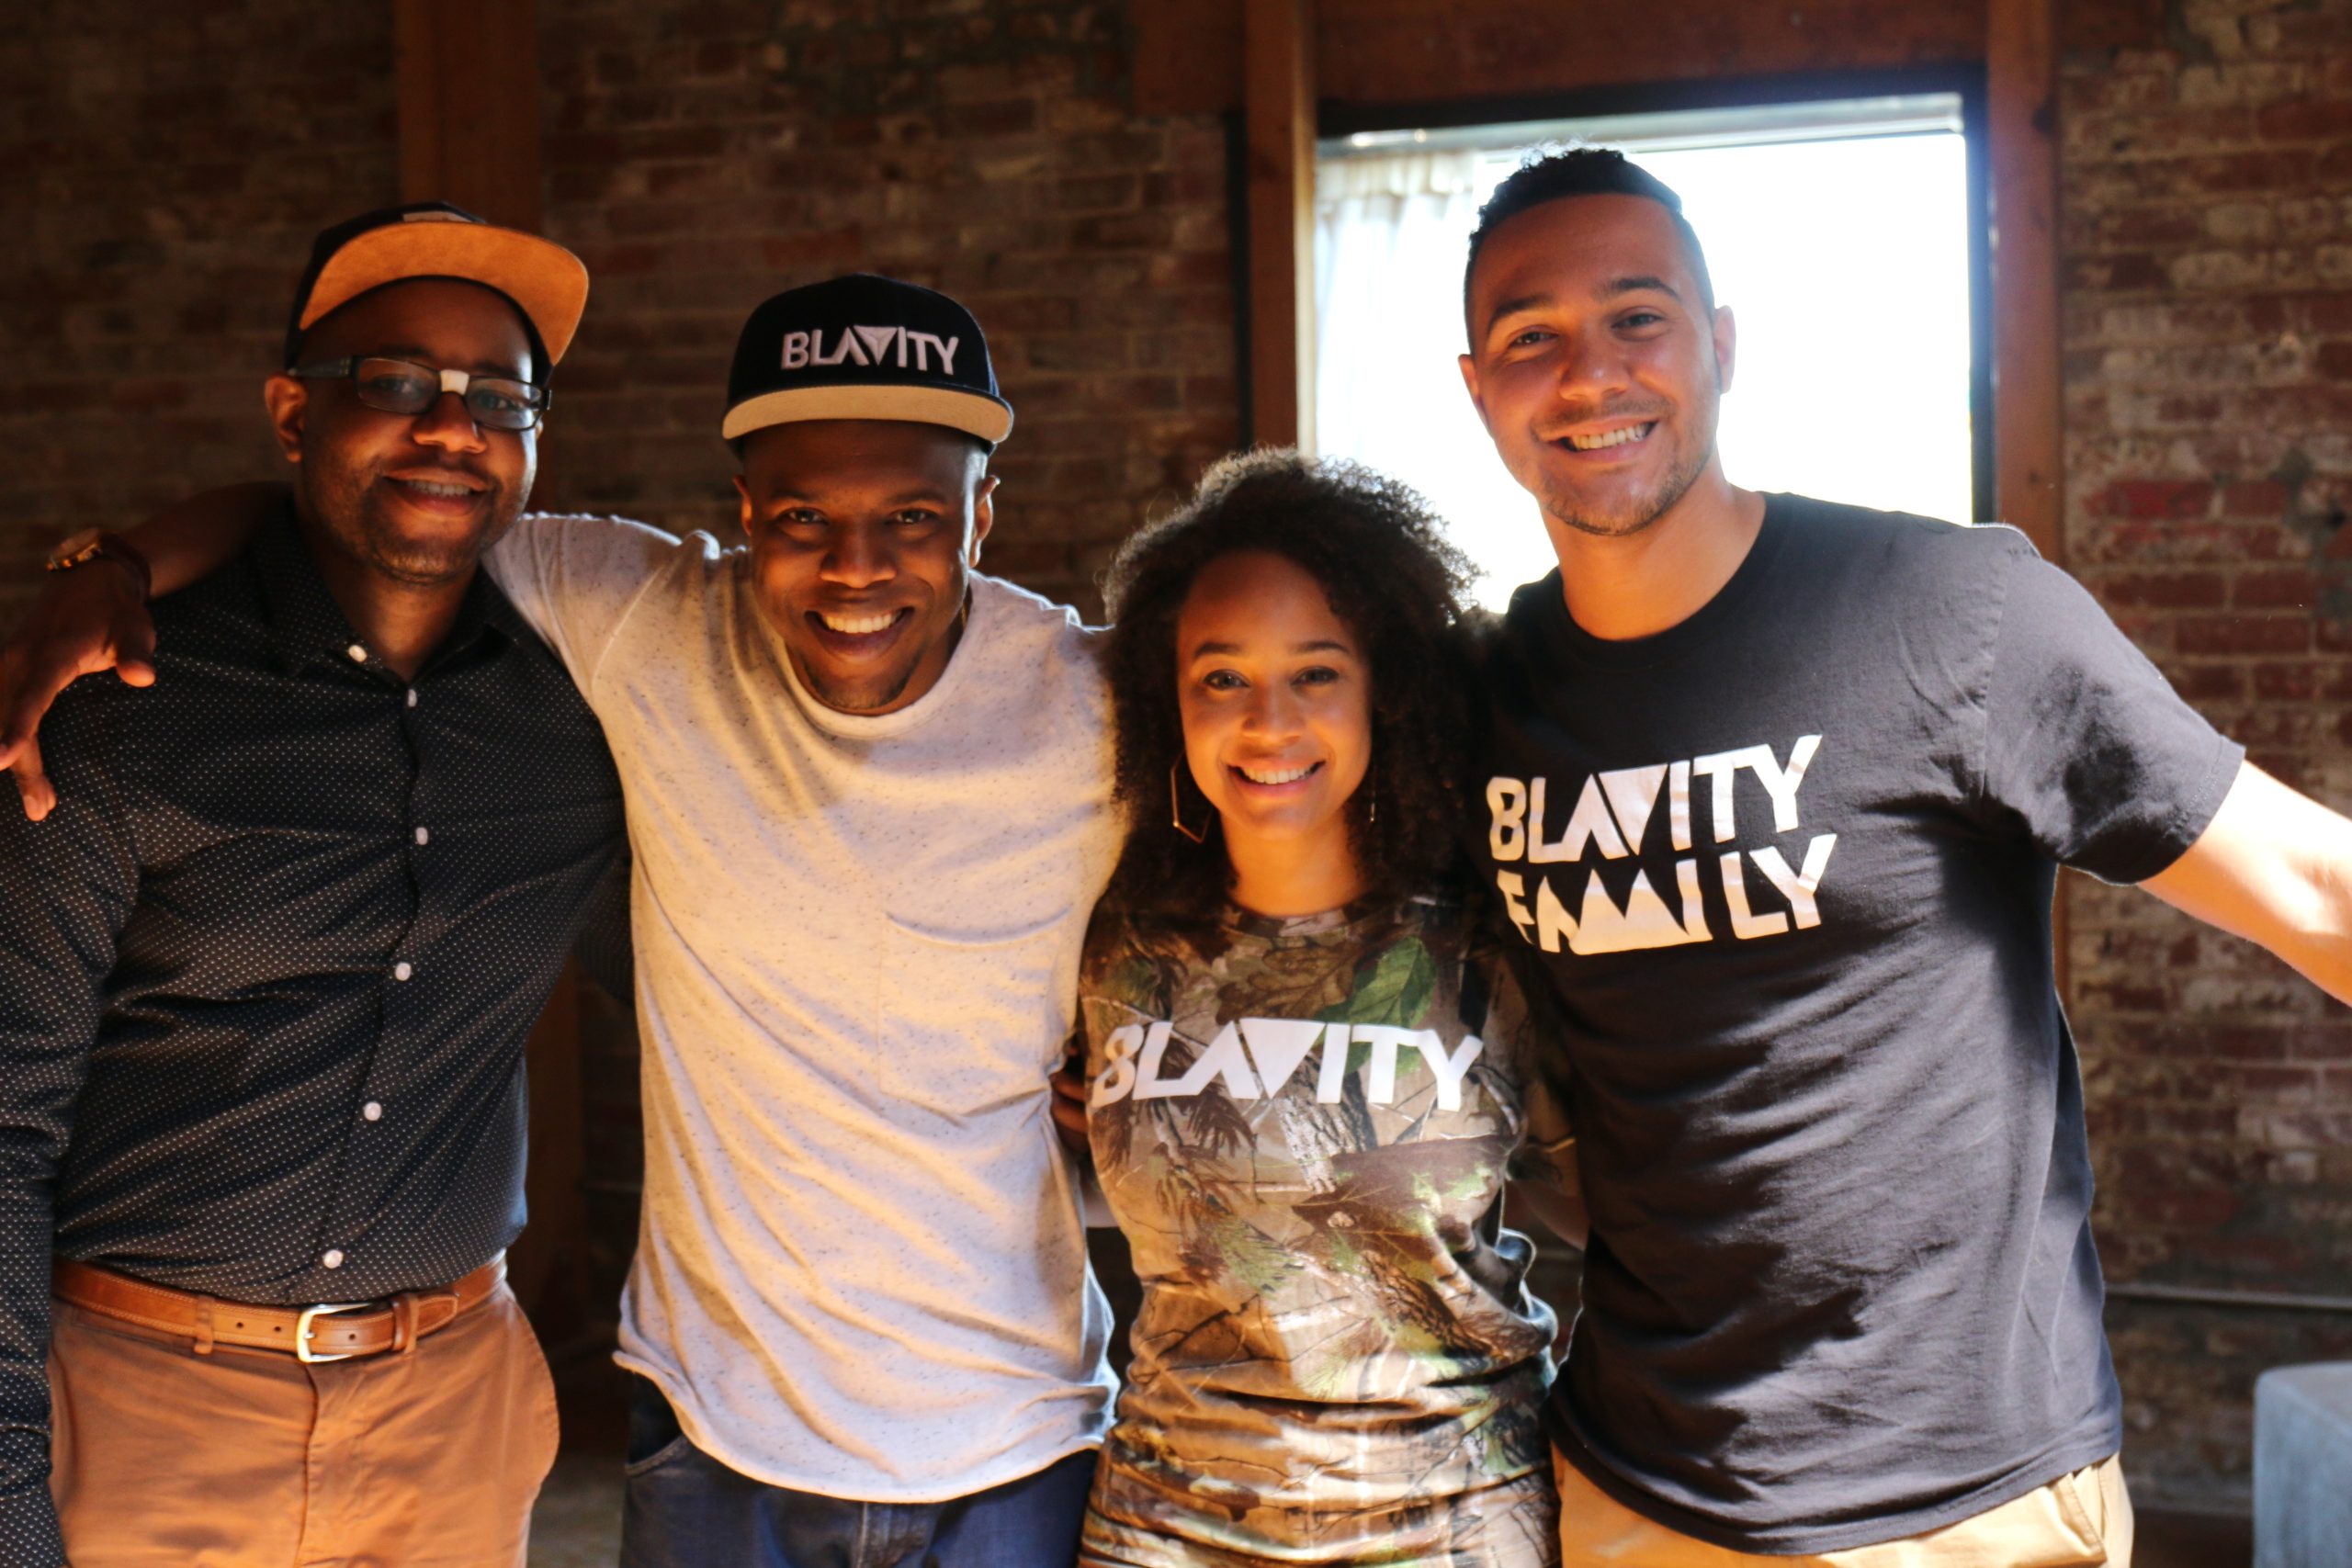 The four founders of Blavity Inc. standing together with smiles on their faces